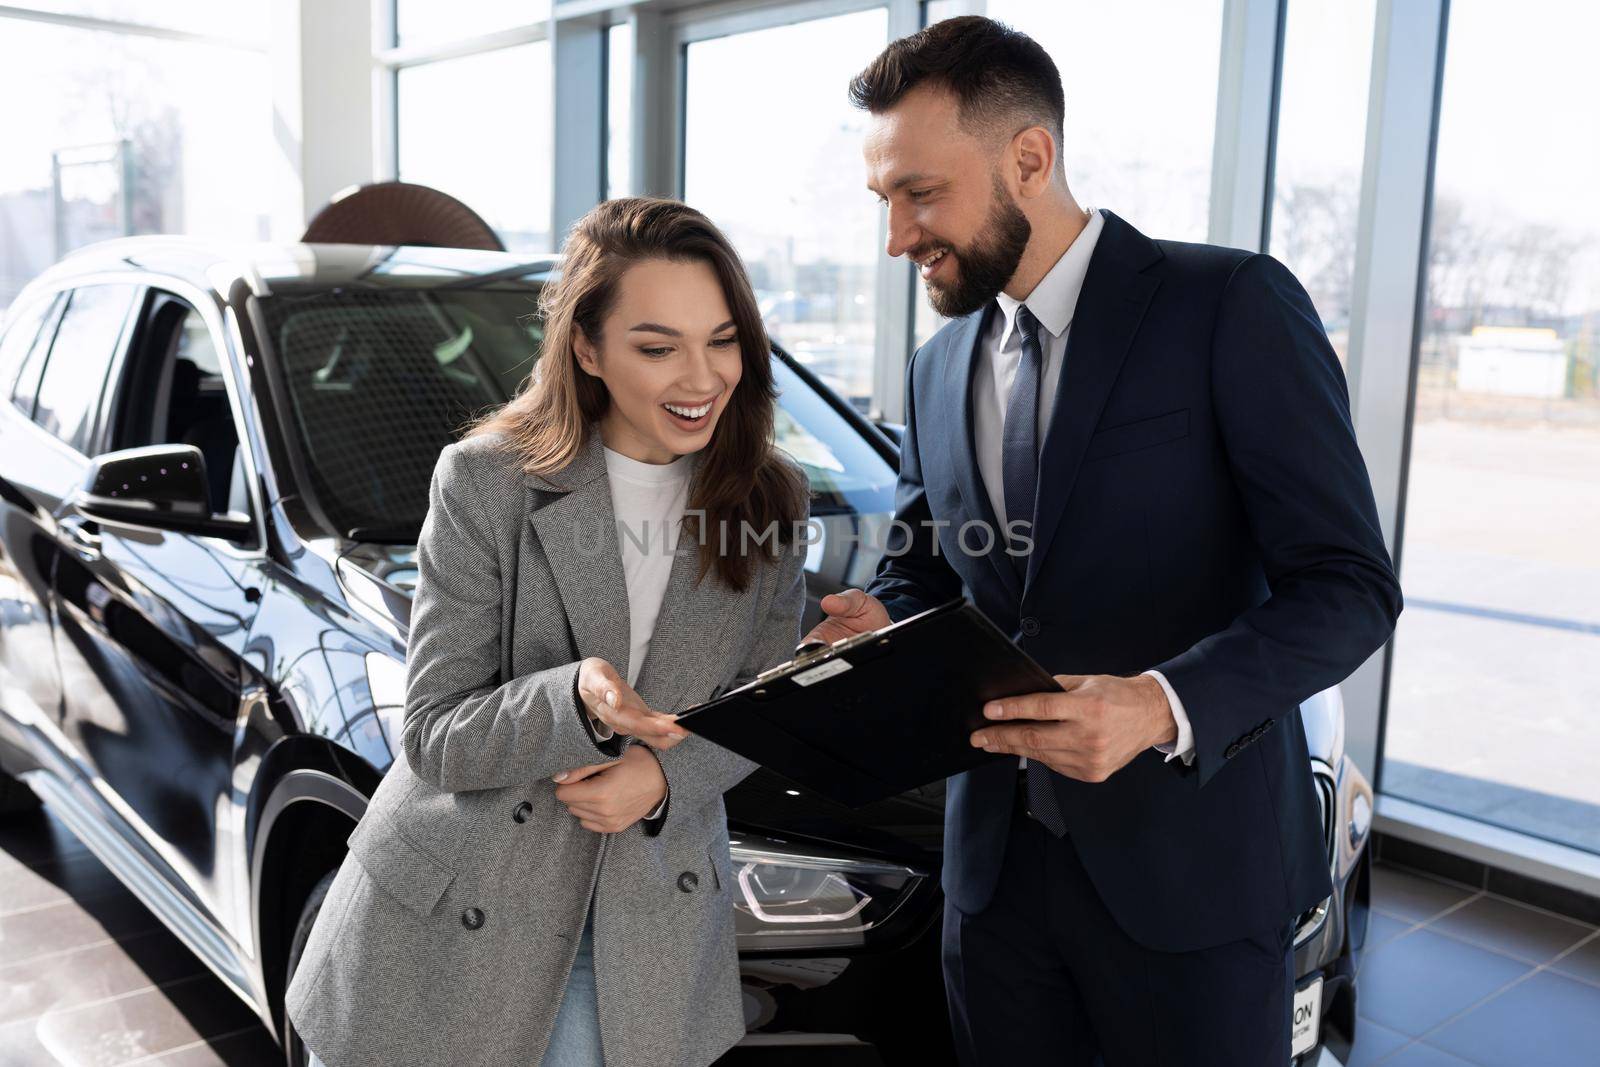 an employee of an insurance company helps to understand the insurance policy of a buyer of a new car.